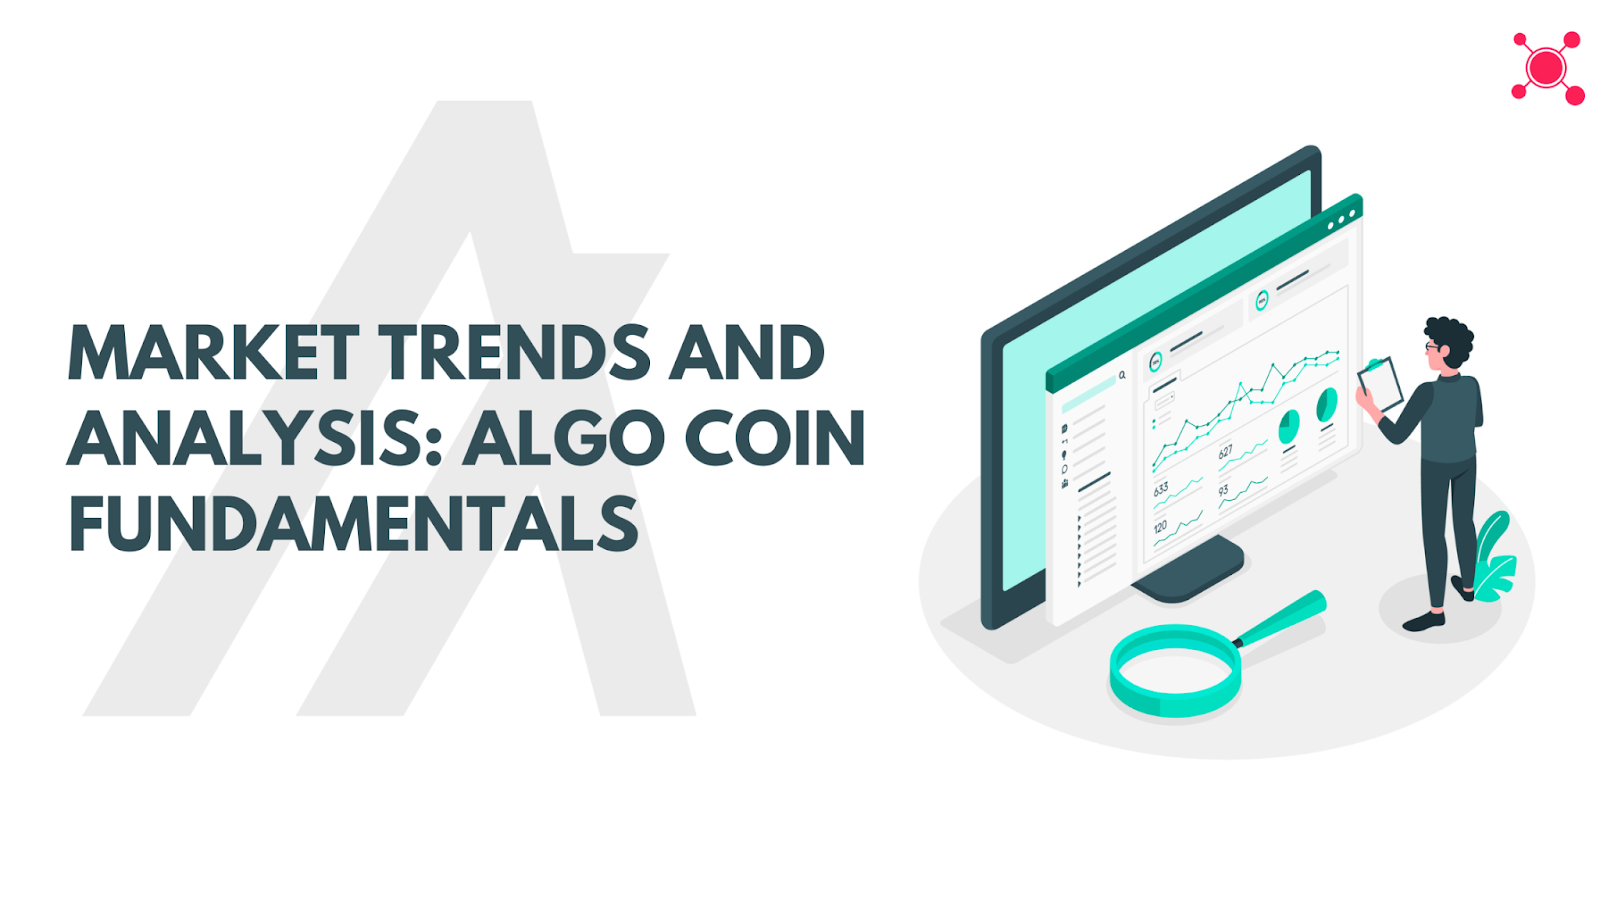 Algo Coin's Potential as a Long-Term Investment